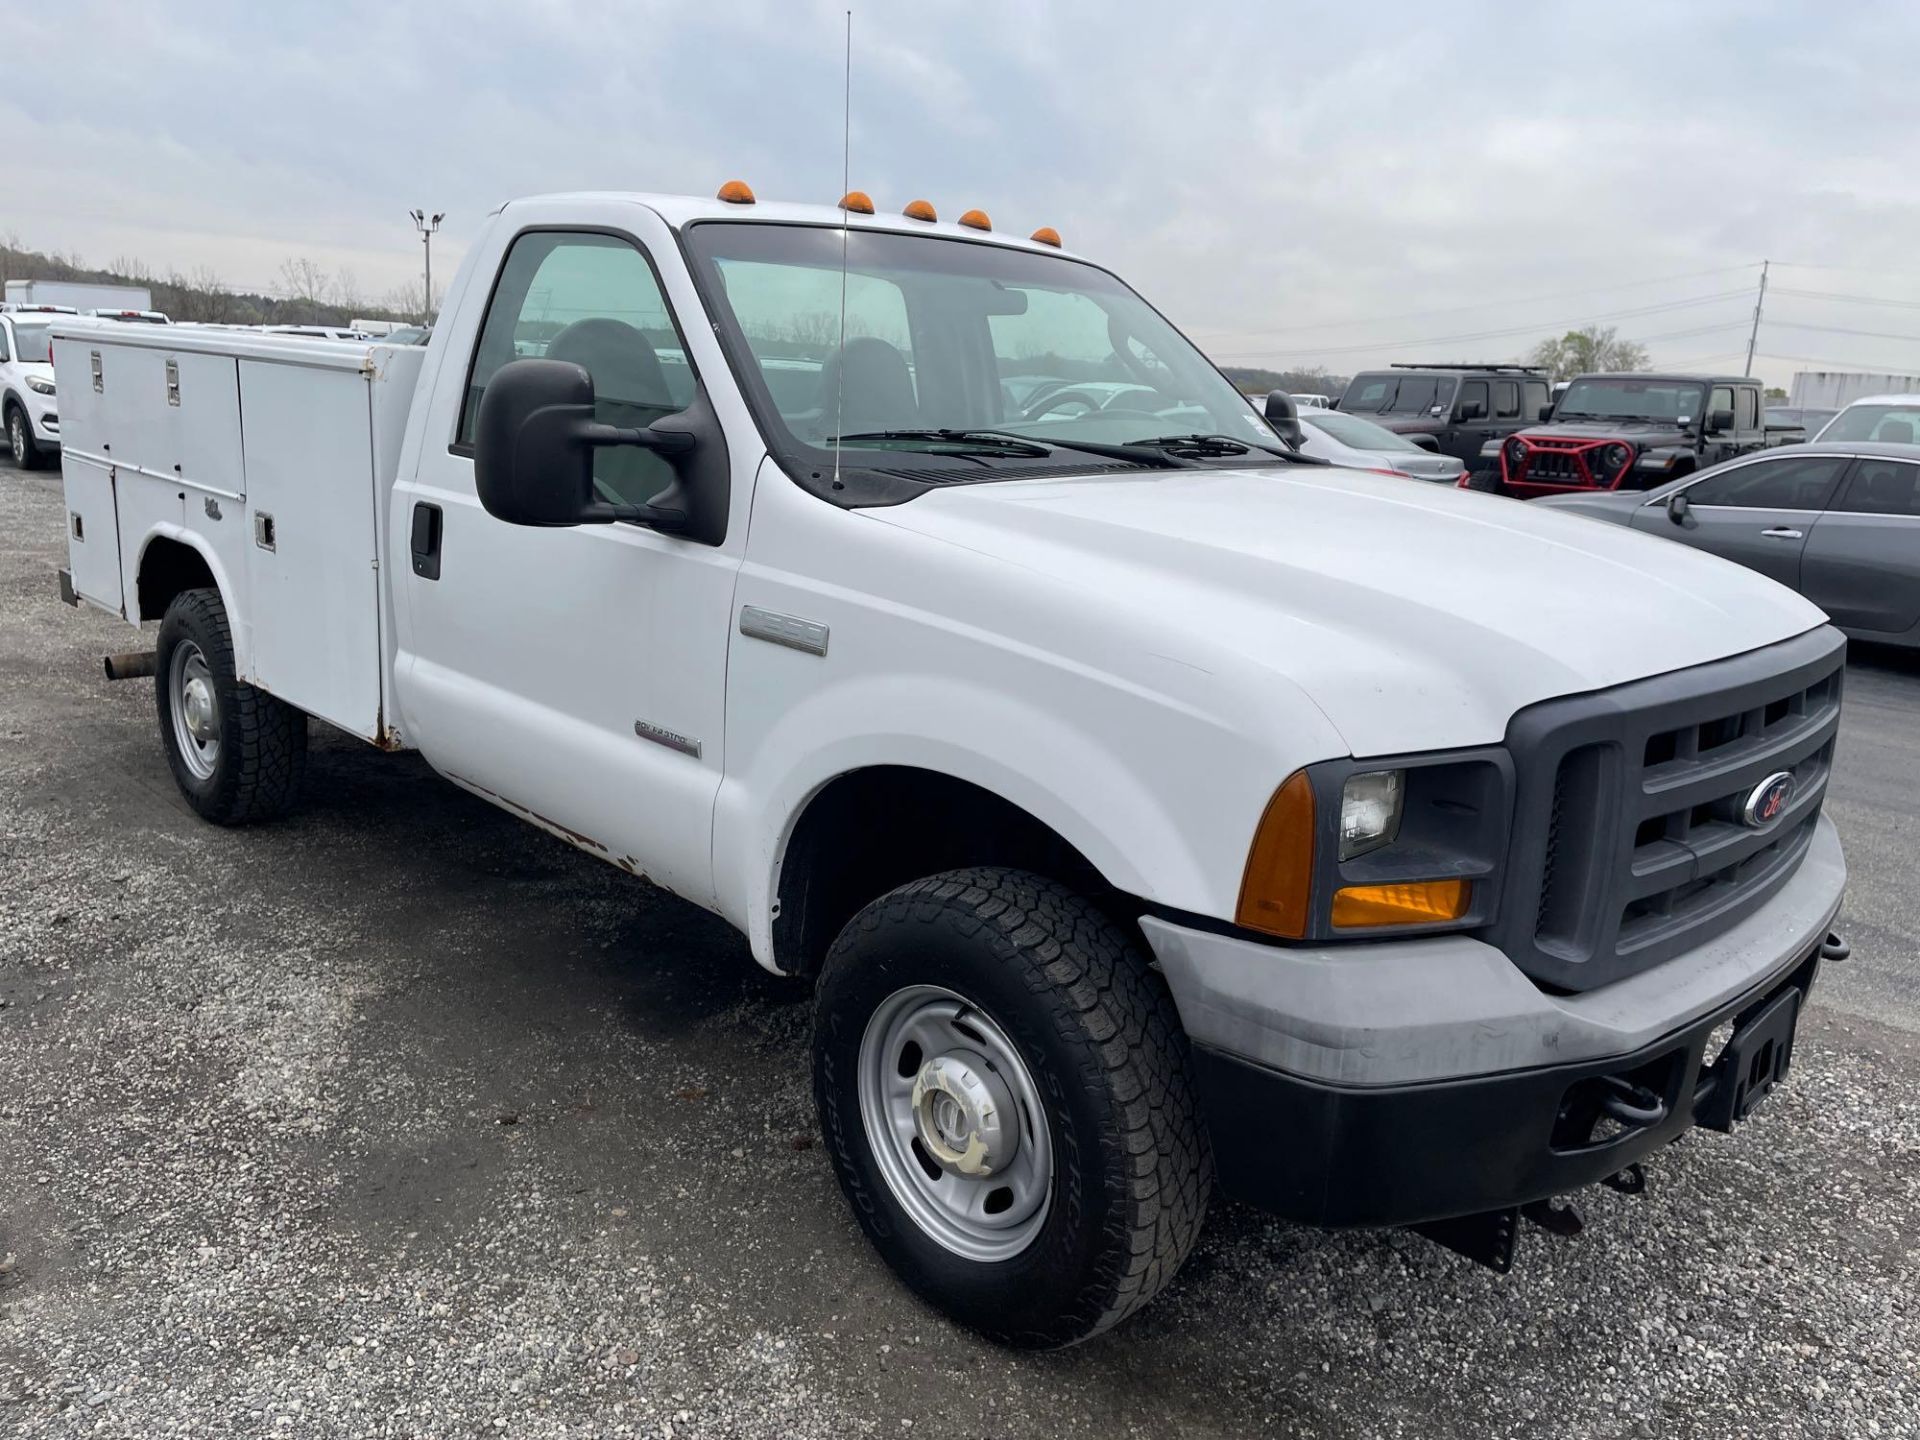 2005 Ford F350 4x4 Utility Truck - Image 4 of 29